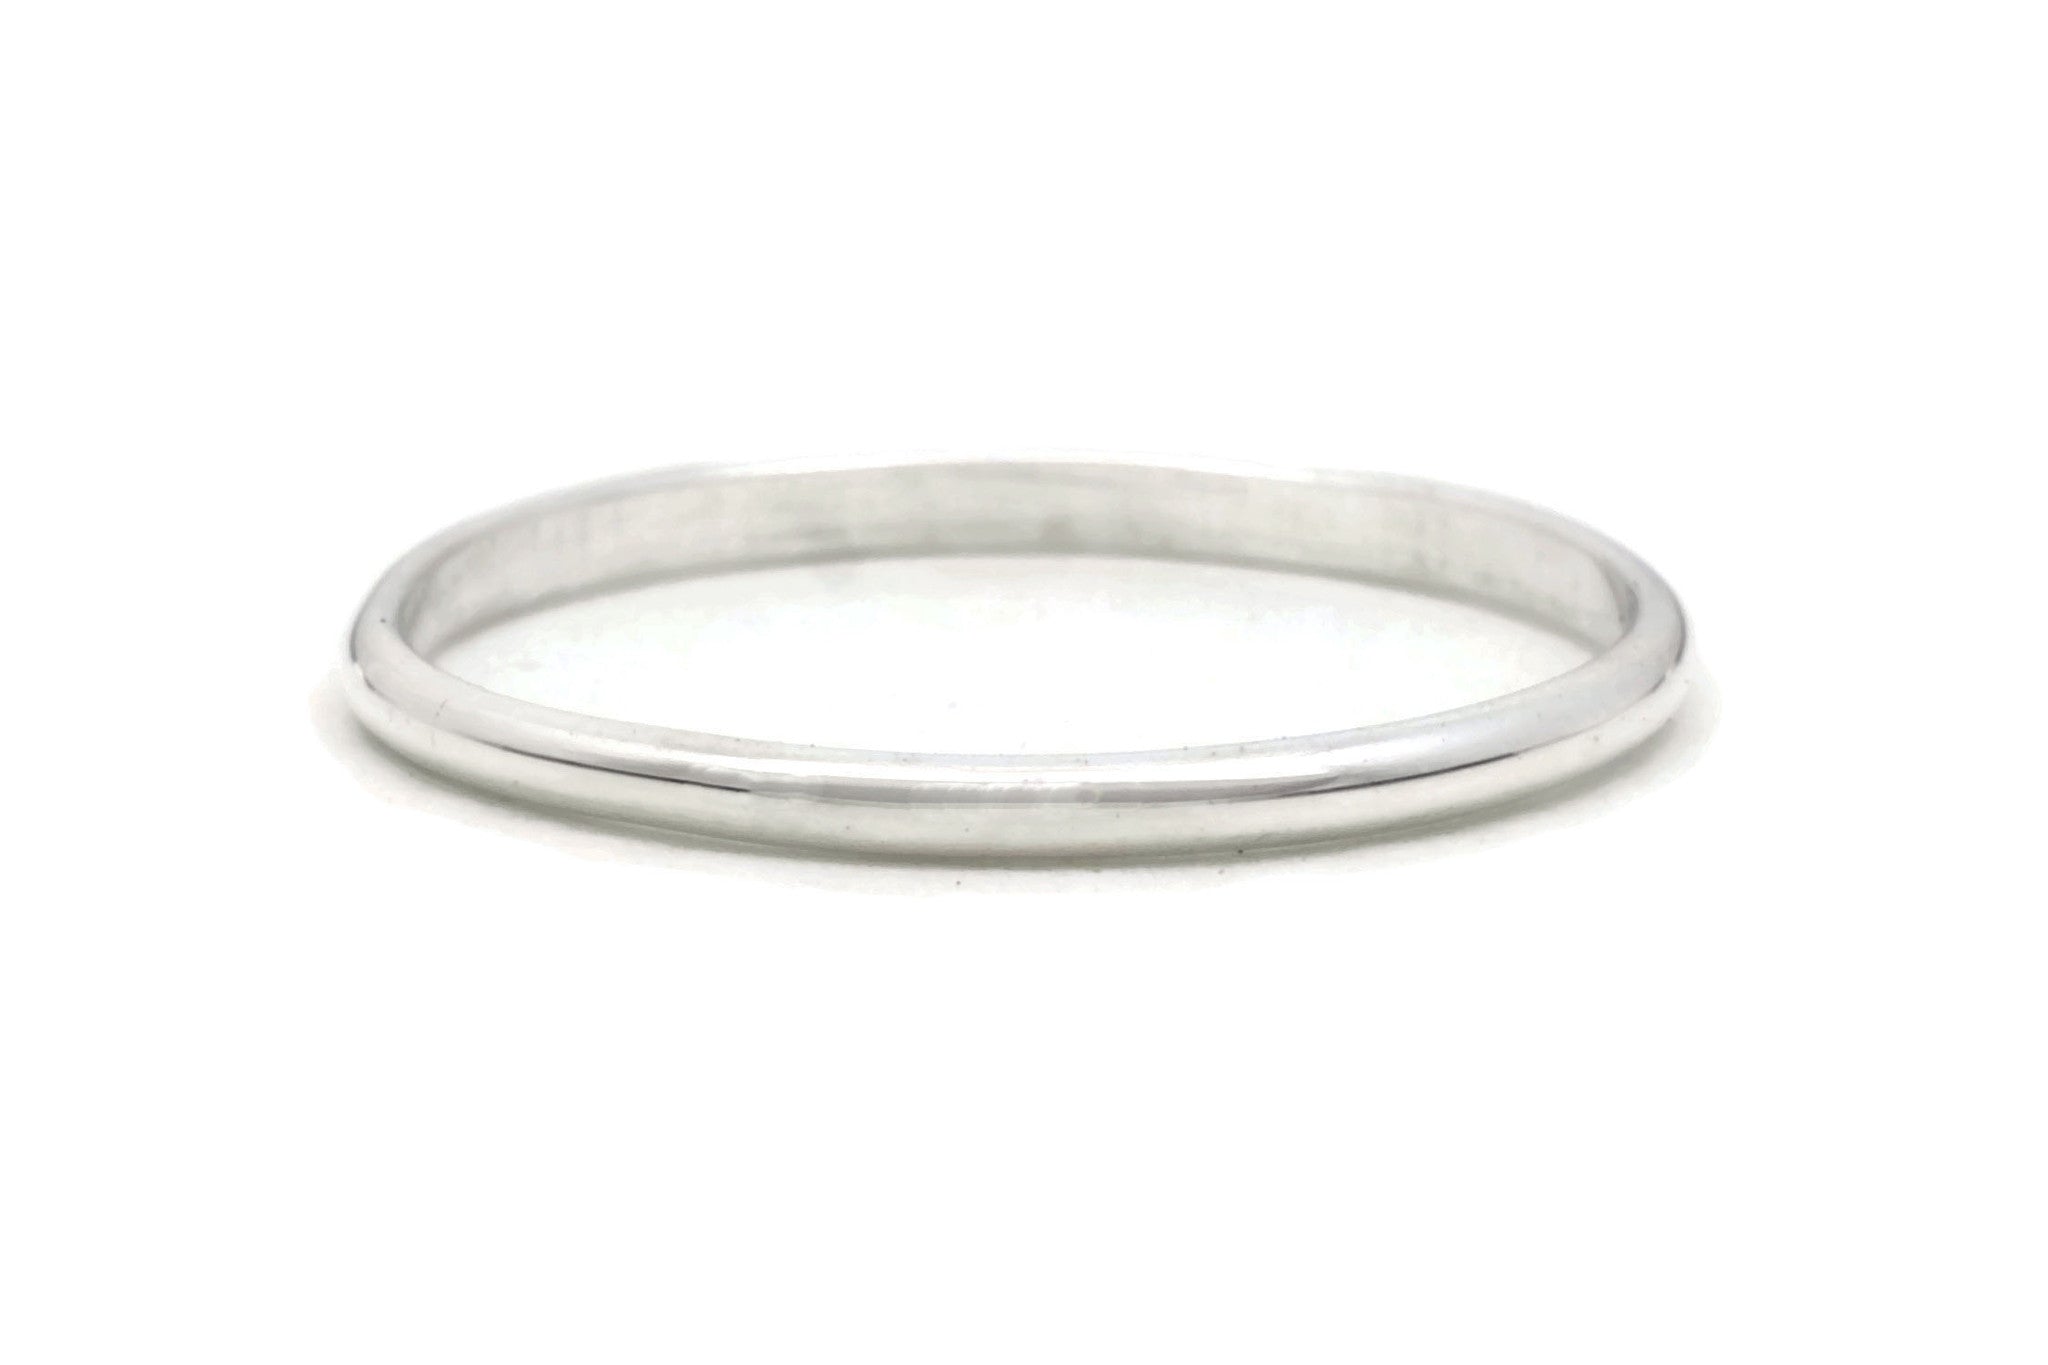 Pure 995 Purity Silver Plain Ring Thin Sterling Handmade Challa